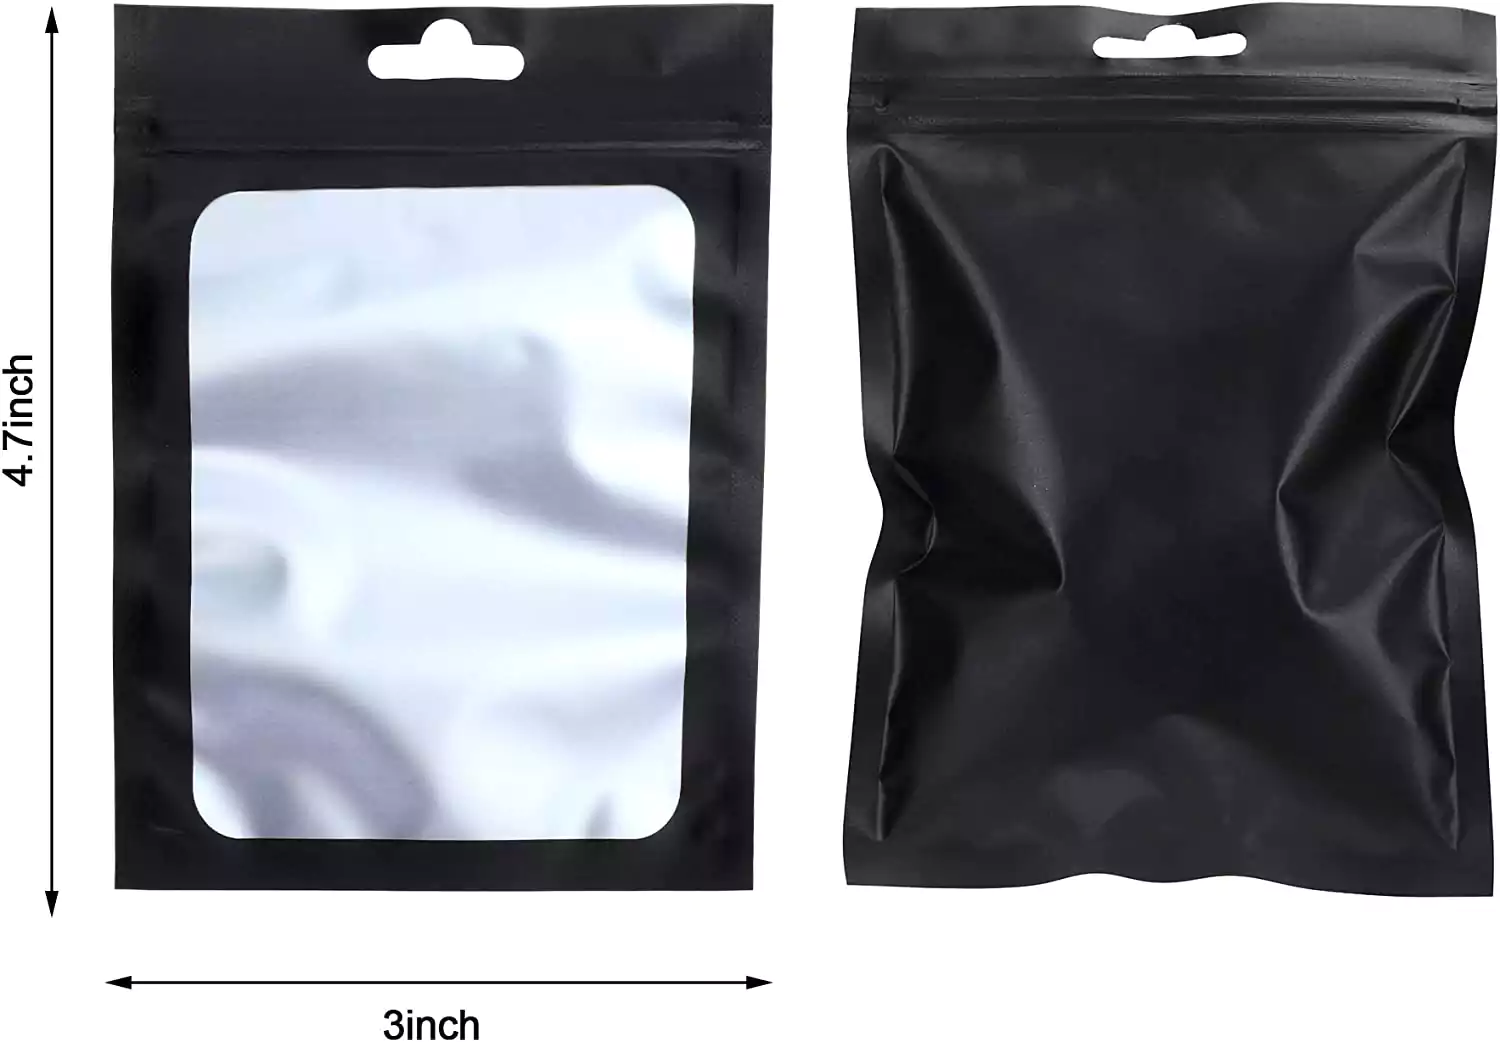 420 smell proof bags